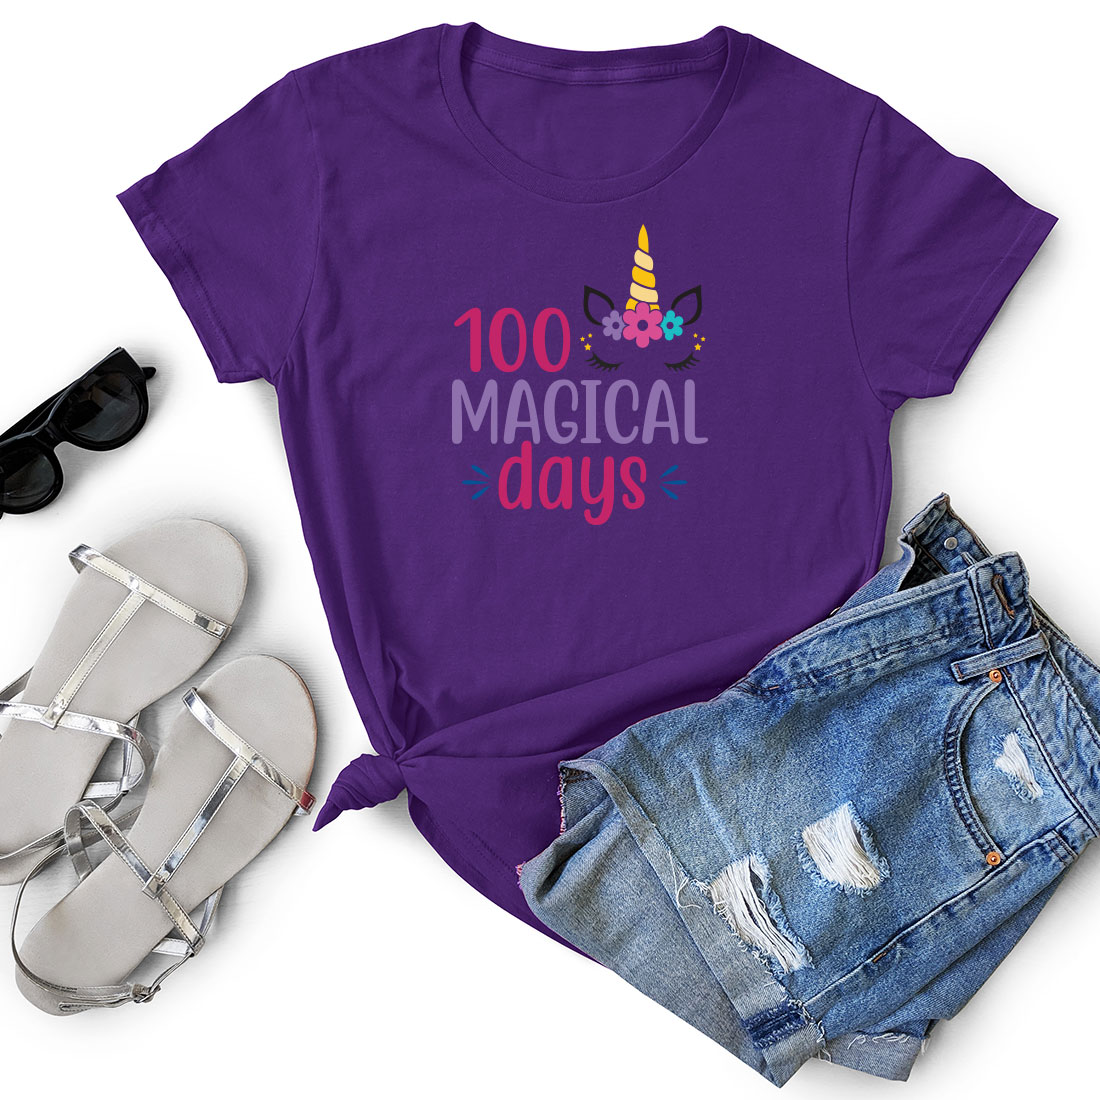 Purple shirt with a unicorn hat and a pair of shorts.